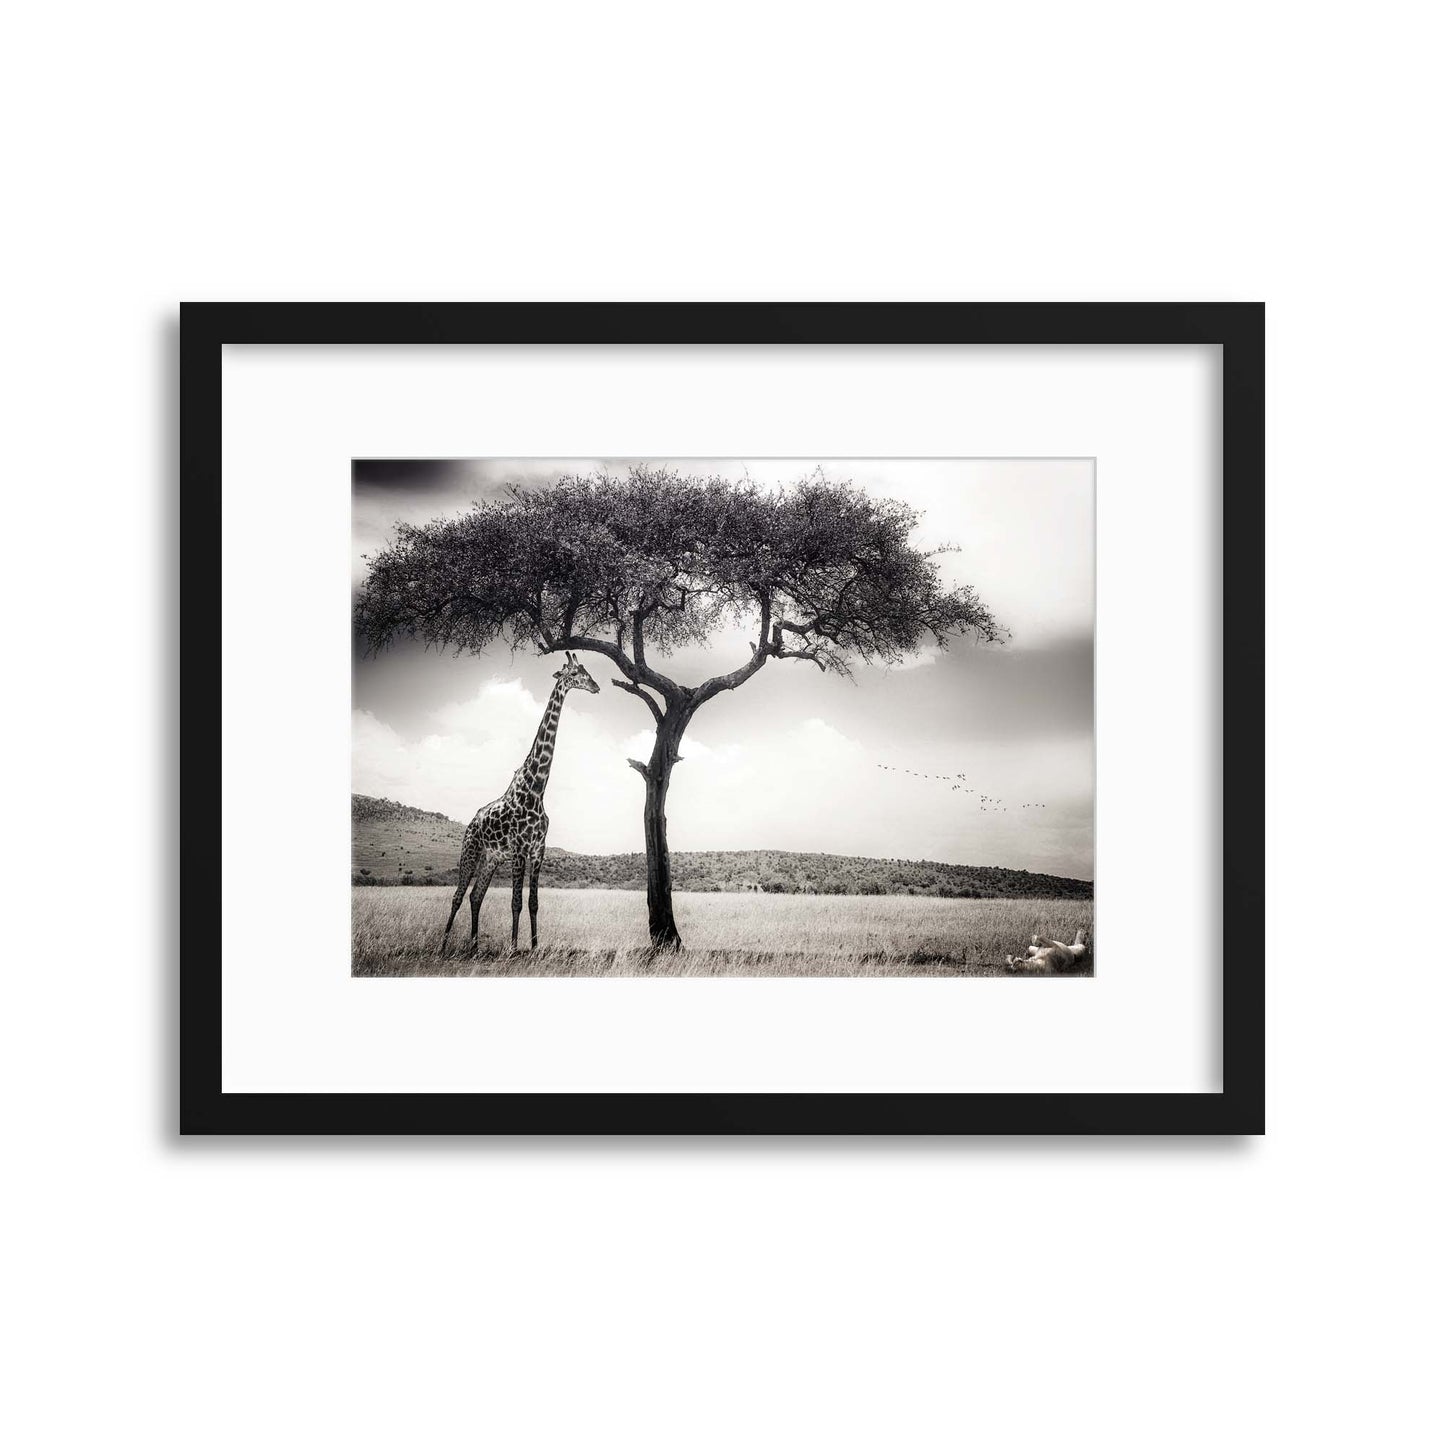 Under the African Sun by Piet Flour Framed Print - USTAD HOME